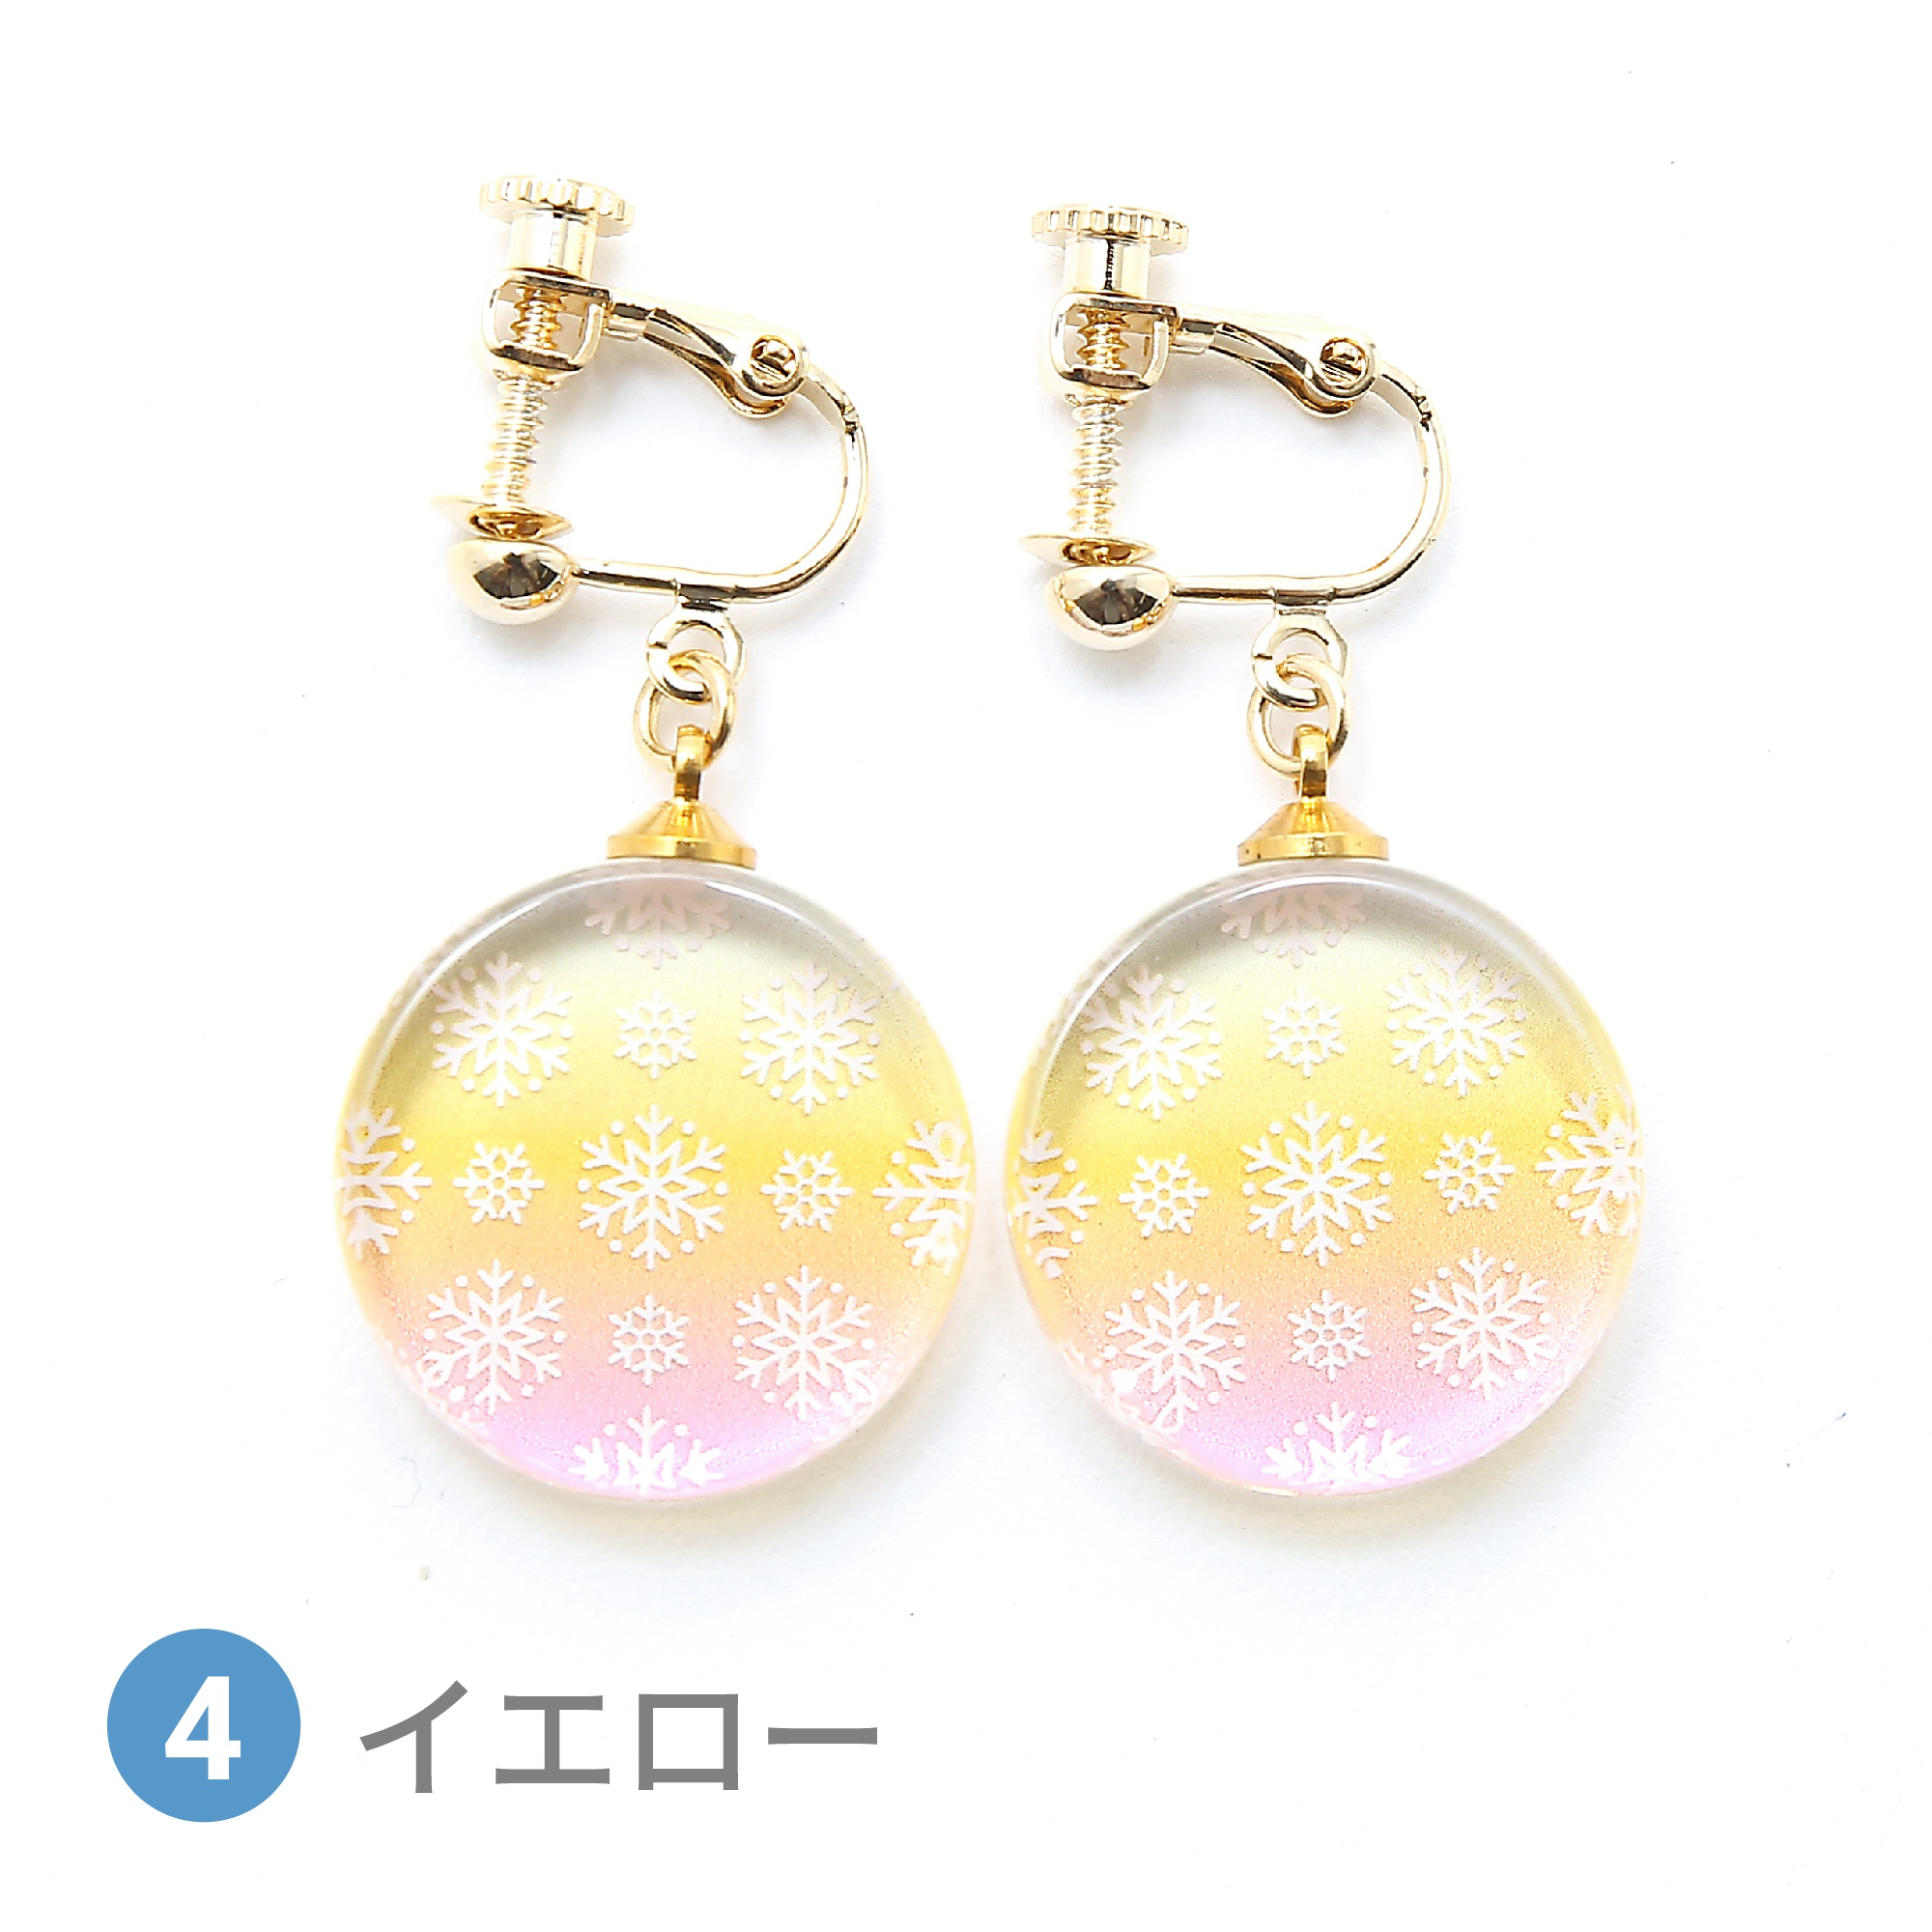 Glass accessories Earring snow flake yellow round shape